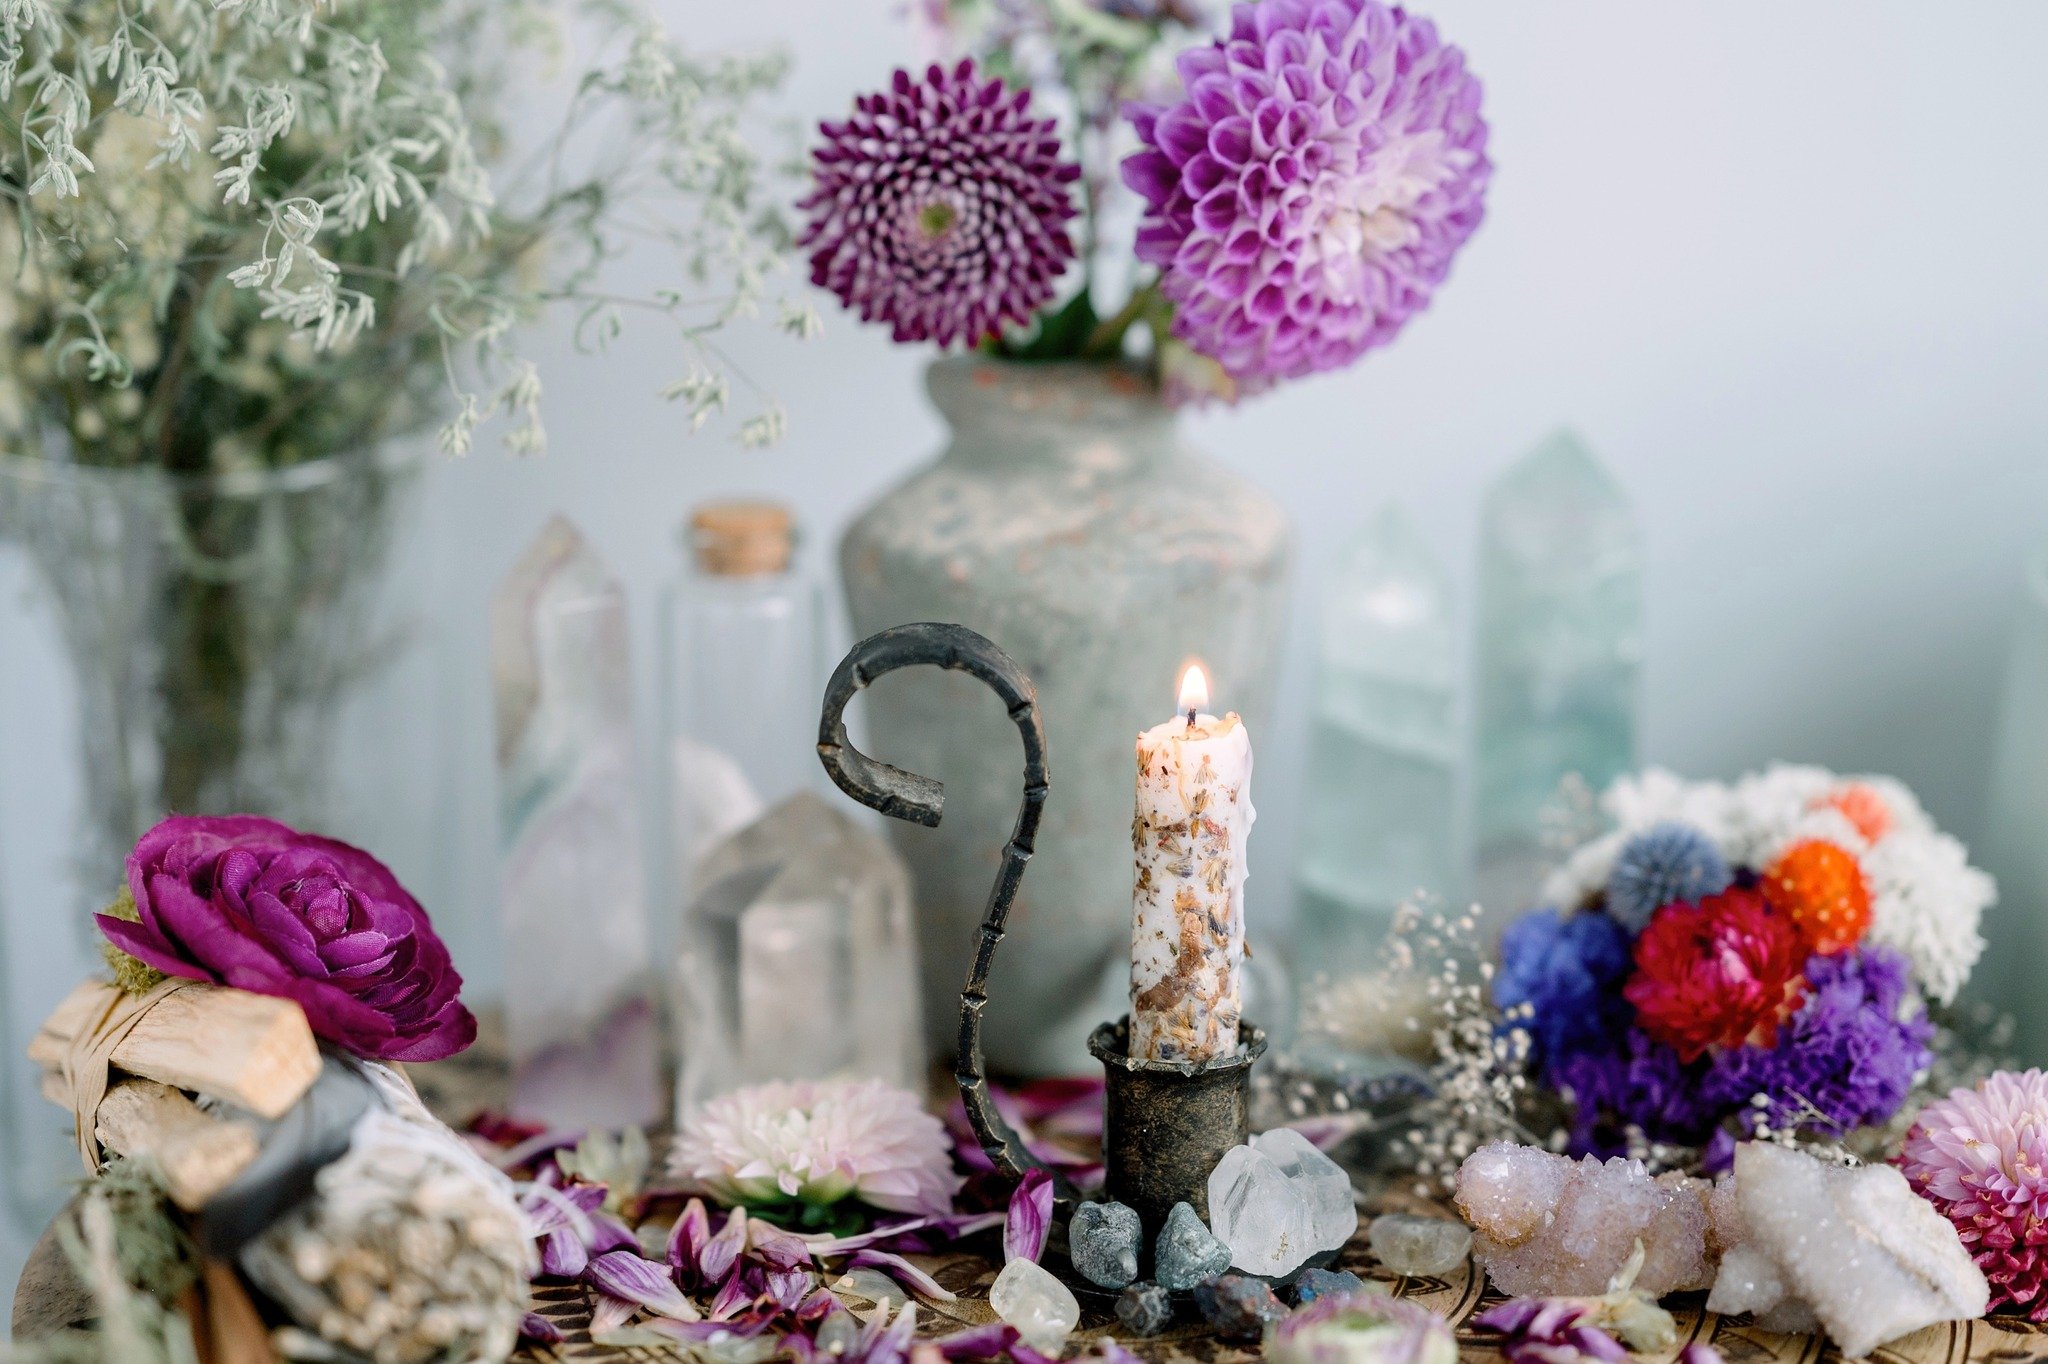 Do you have an altar for your meditation, journaling, or ceremony? 

My altar is my sacred space for connecting with the divine and creating physicality - heaven on earth, energy into matter, inspiration into form.

If you haven't changed up your alt